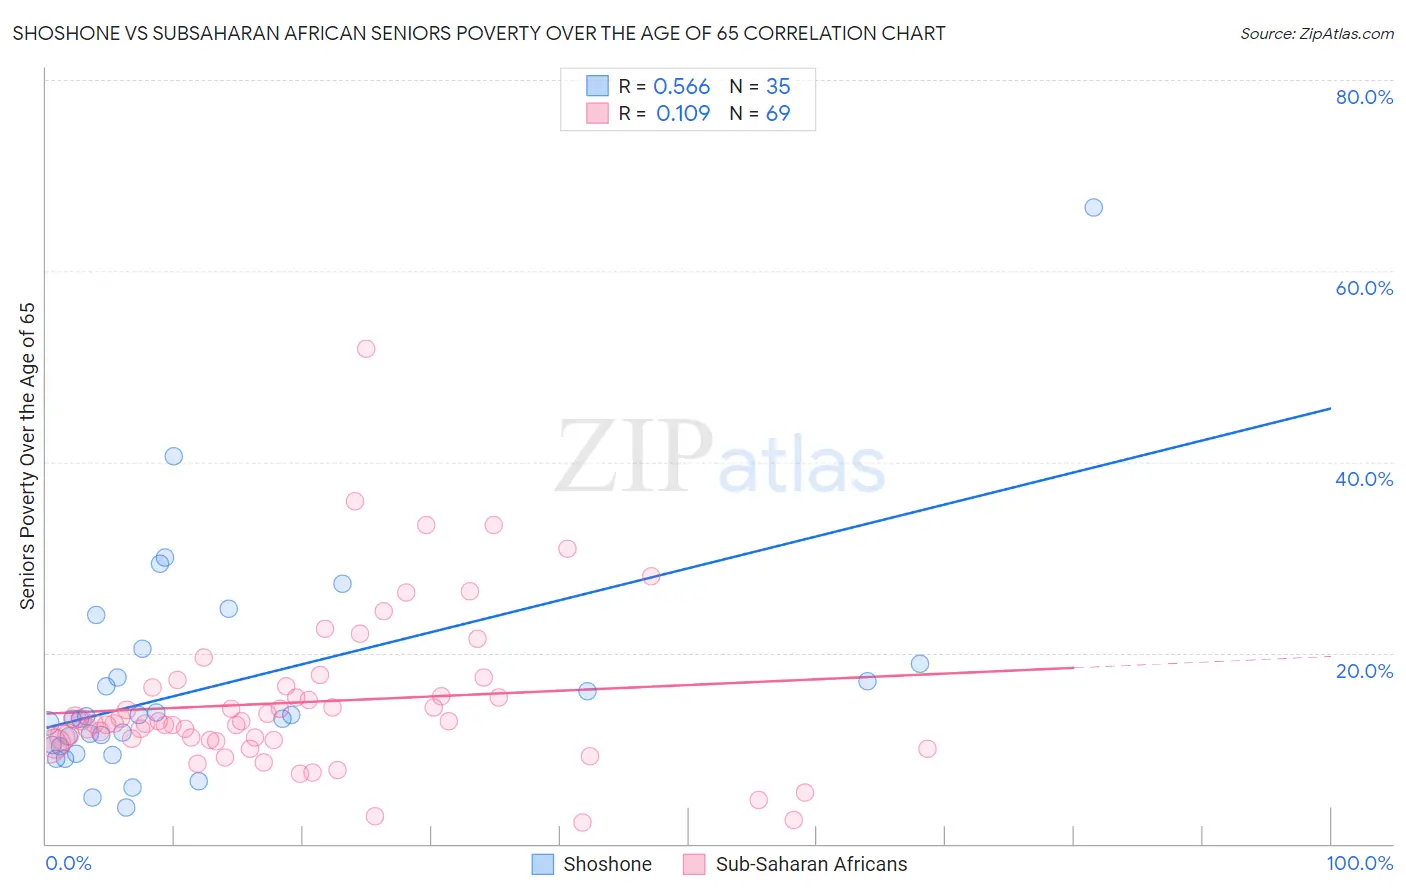 Shoshone vs Subsaharan African Seniors Poverty Over the Age of 65